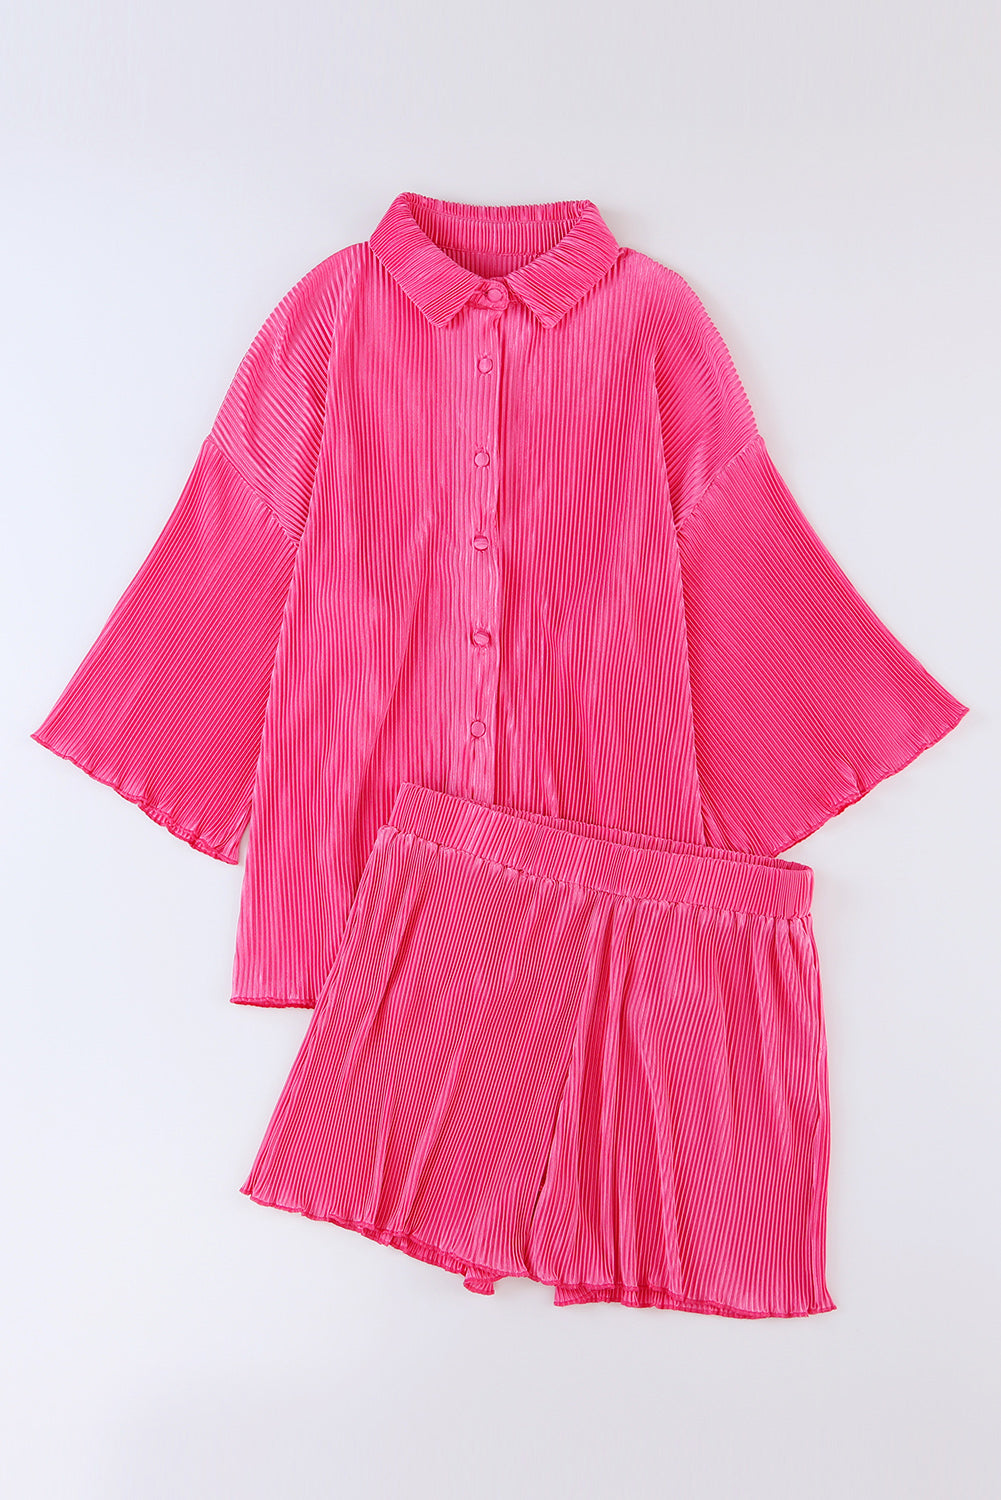 Rose 3/4 Sleeves Pleated Shirt and High Waist Shorts Lounge Set